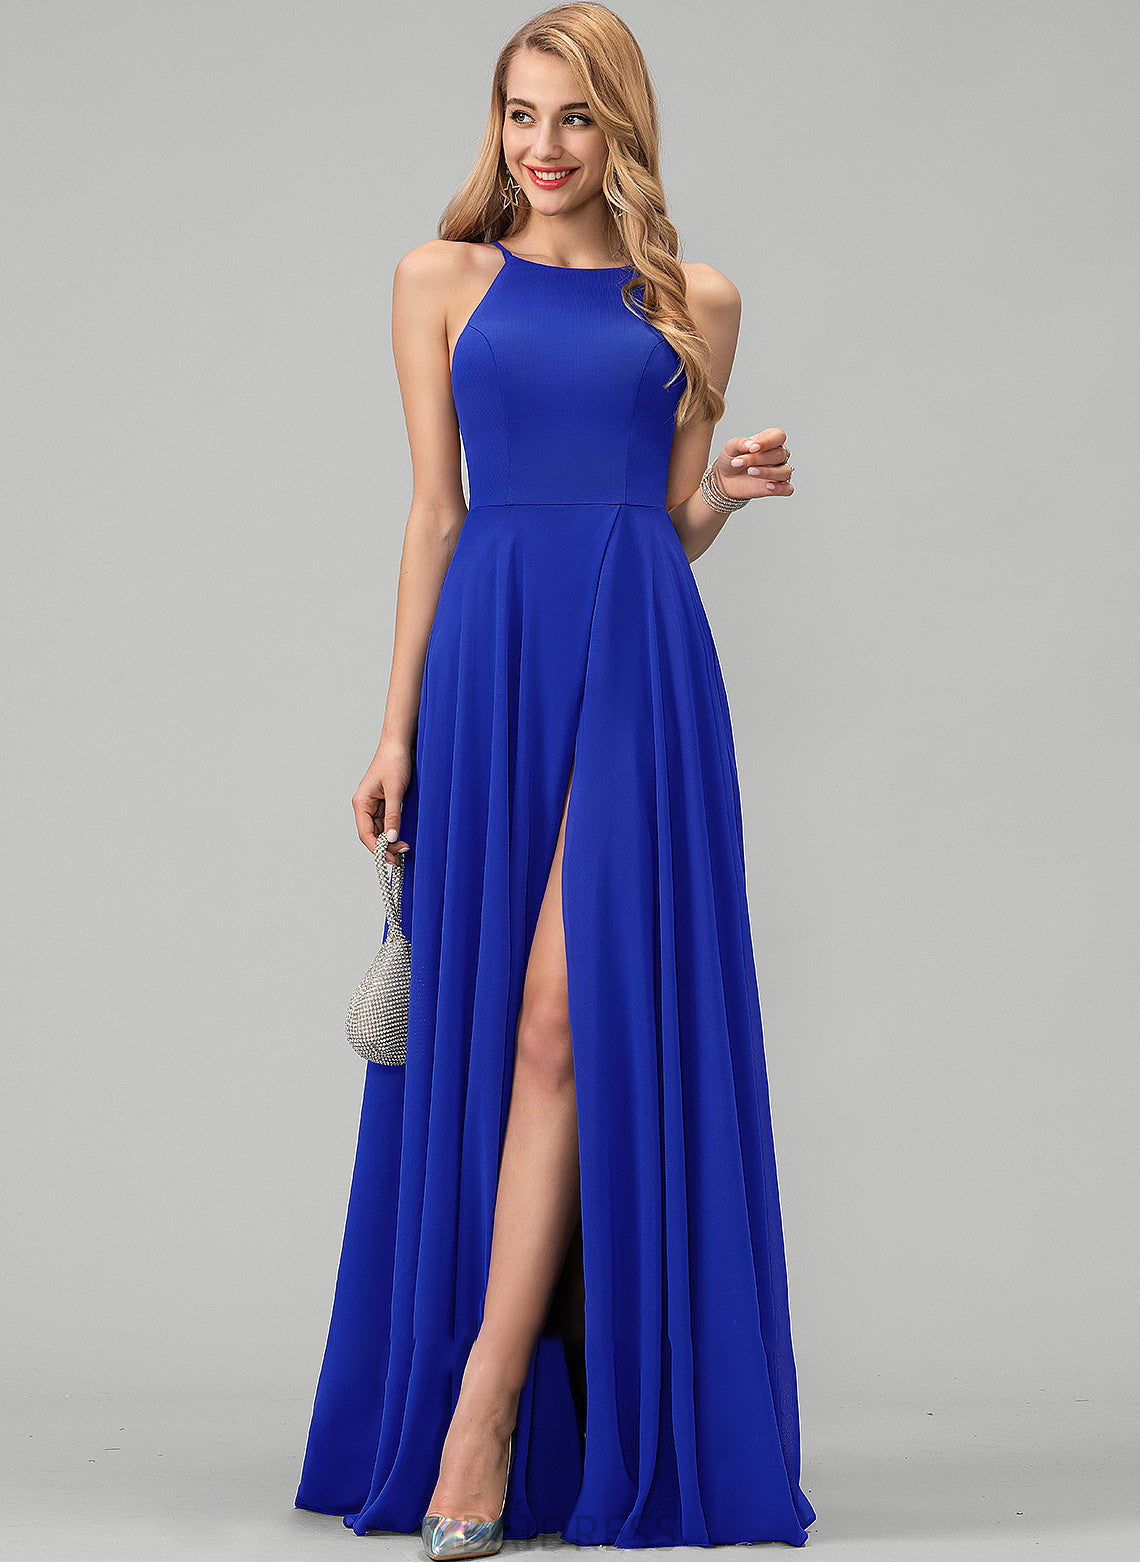 Front Neck Split Scoop Chiffon Prom Dresses Floor-Length With A-Line Holly